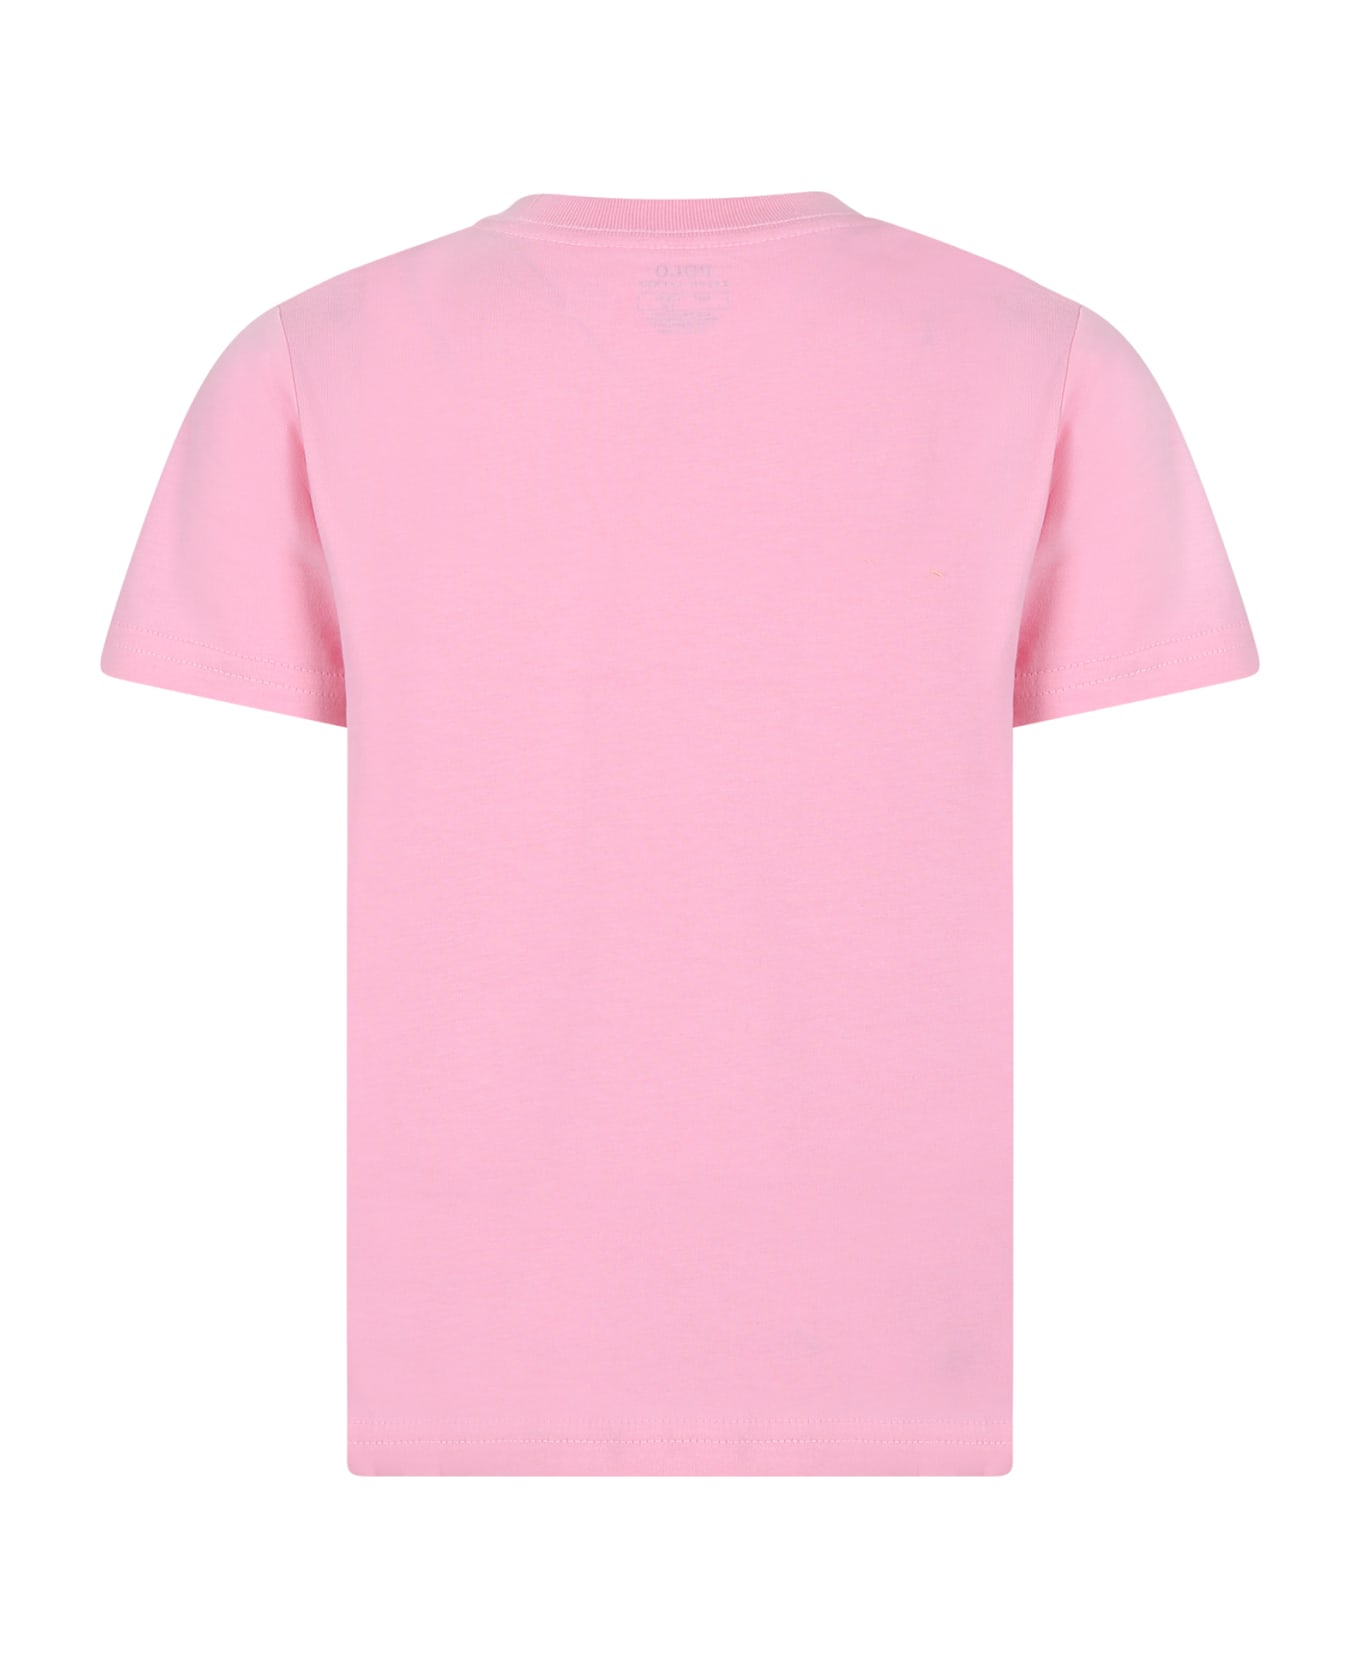 Ralph Lauren Pink T-shirt For Girl With Pony - Pink